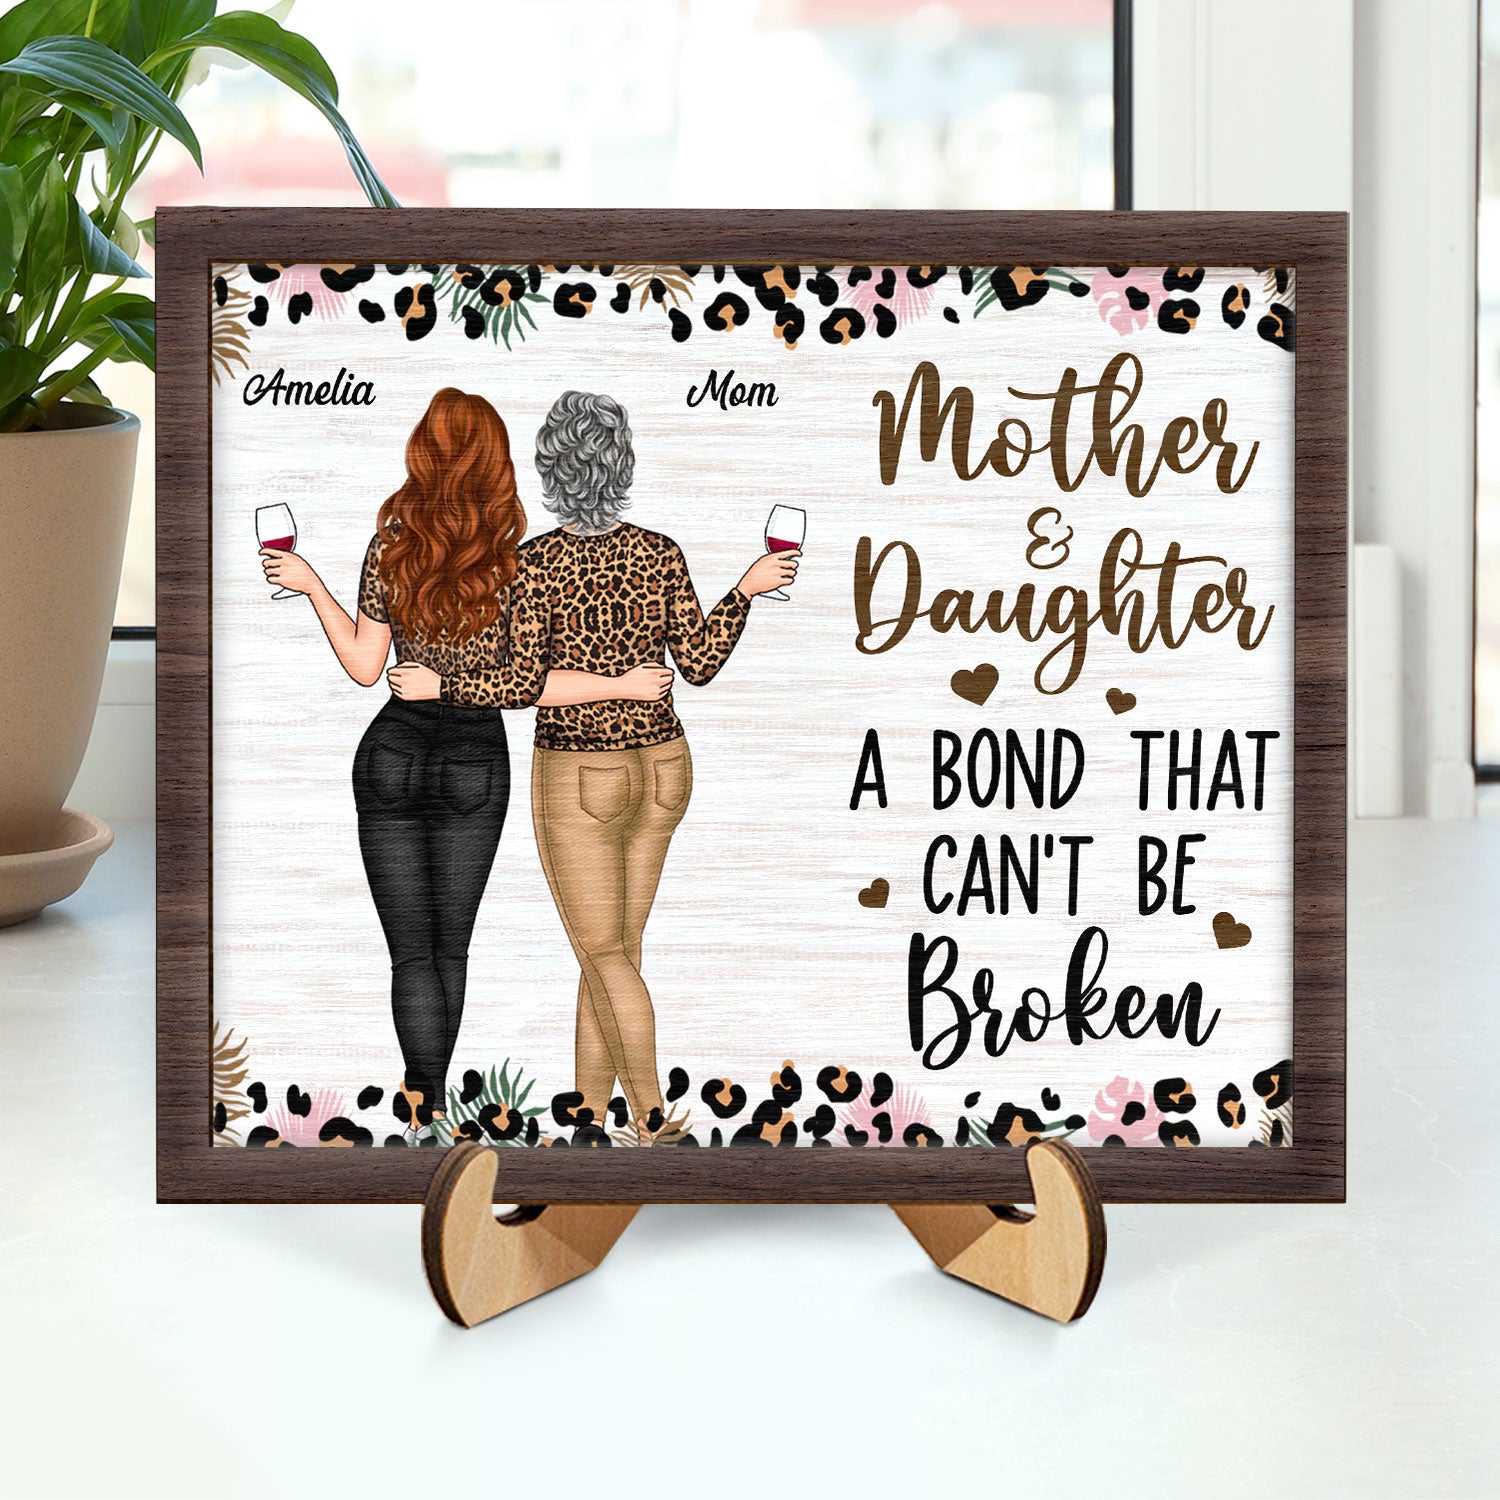 Mother & Daughters A Bond That Can't Be Broken - Gift For Mom, Mother, Grandma - Personalized 2-Layered Wooden Plaque With Stand